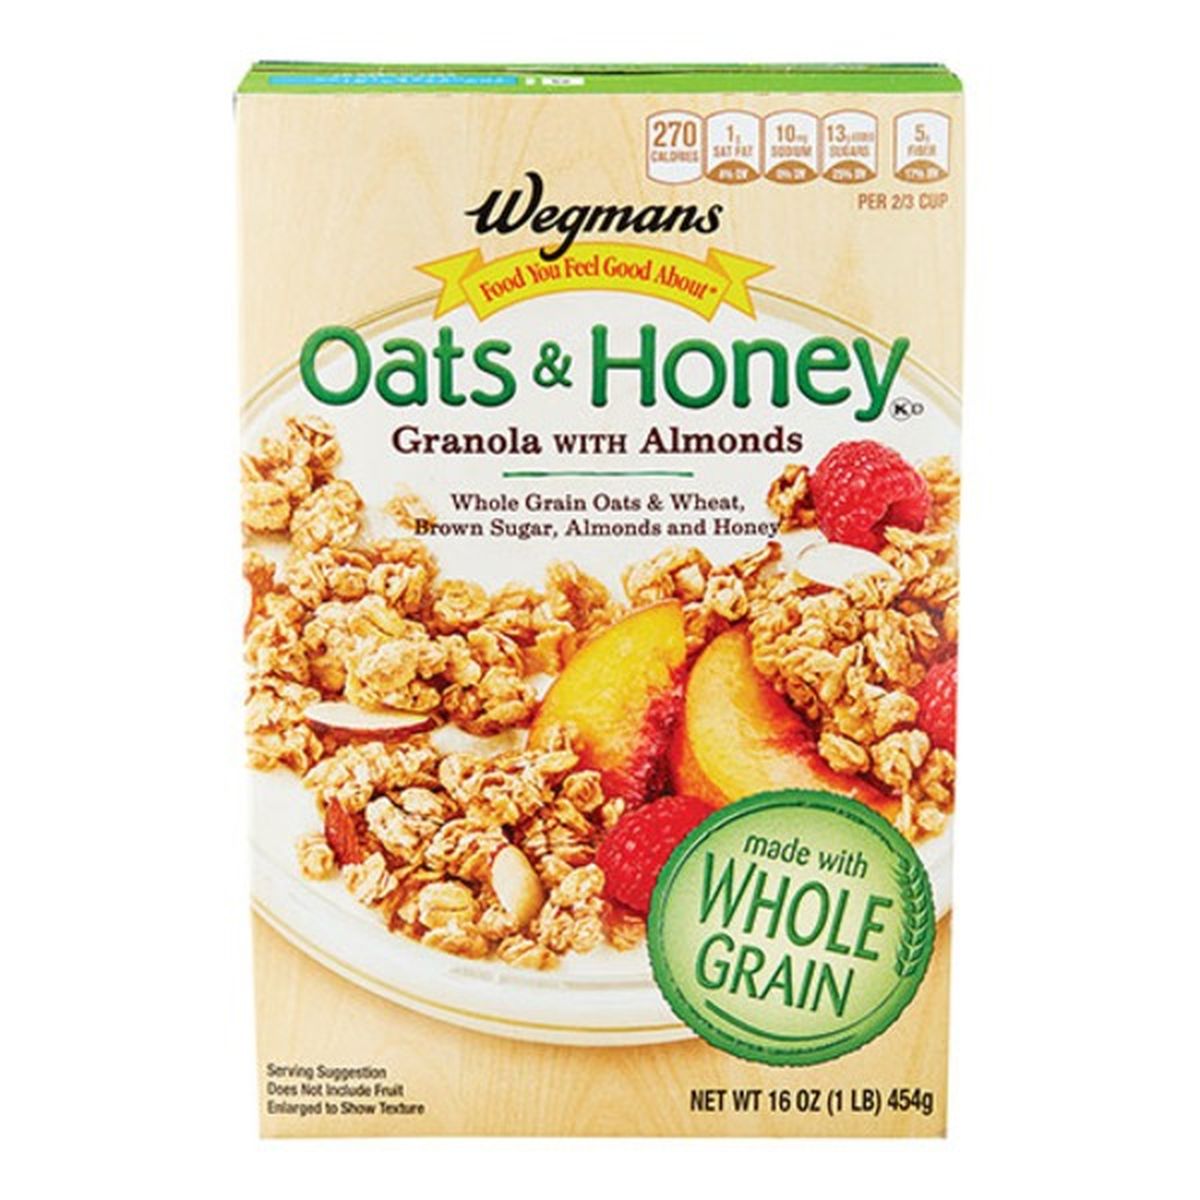 Calories in Wegmans Oats & Honey Granola with Almonds Cereal